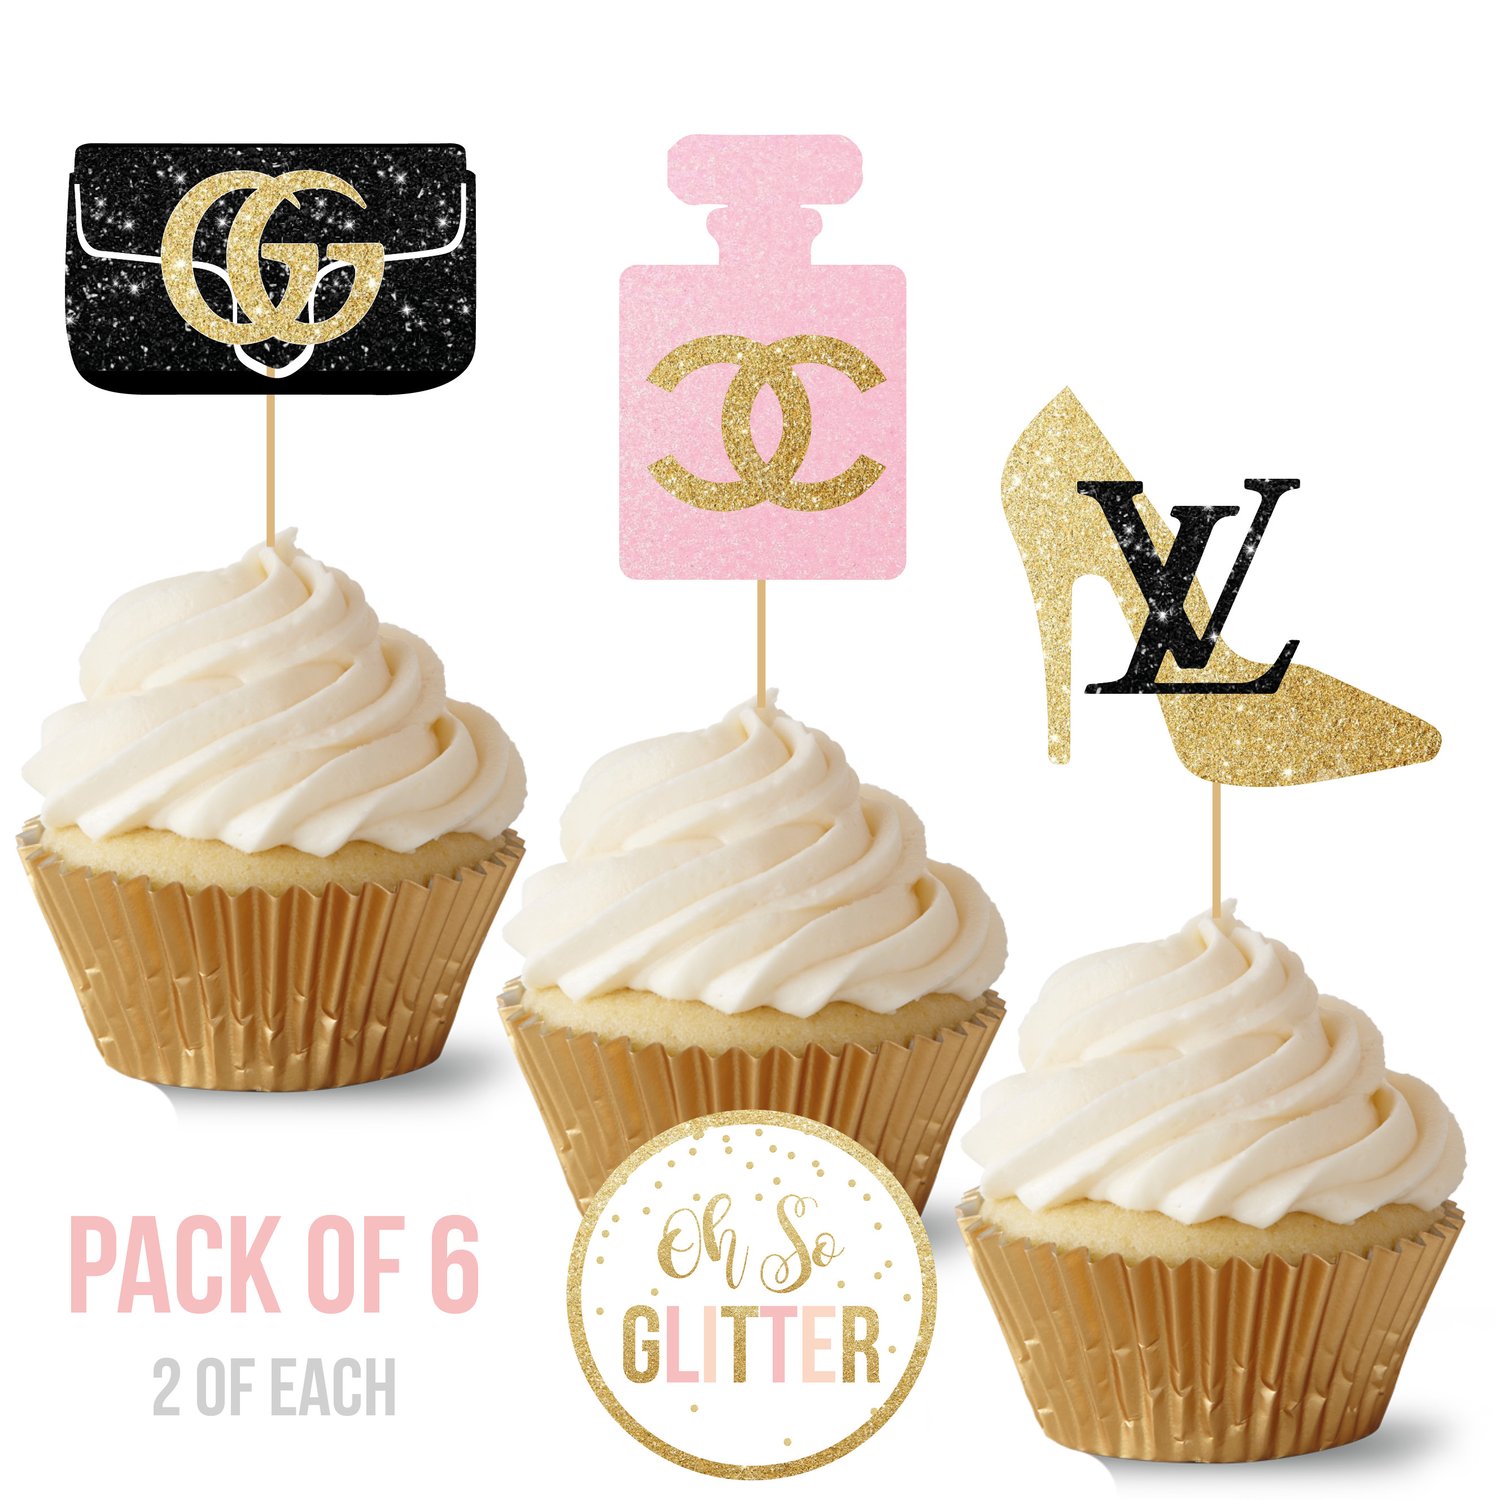 Image of Designer cupcake toppers - pack of 6